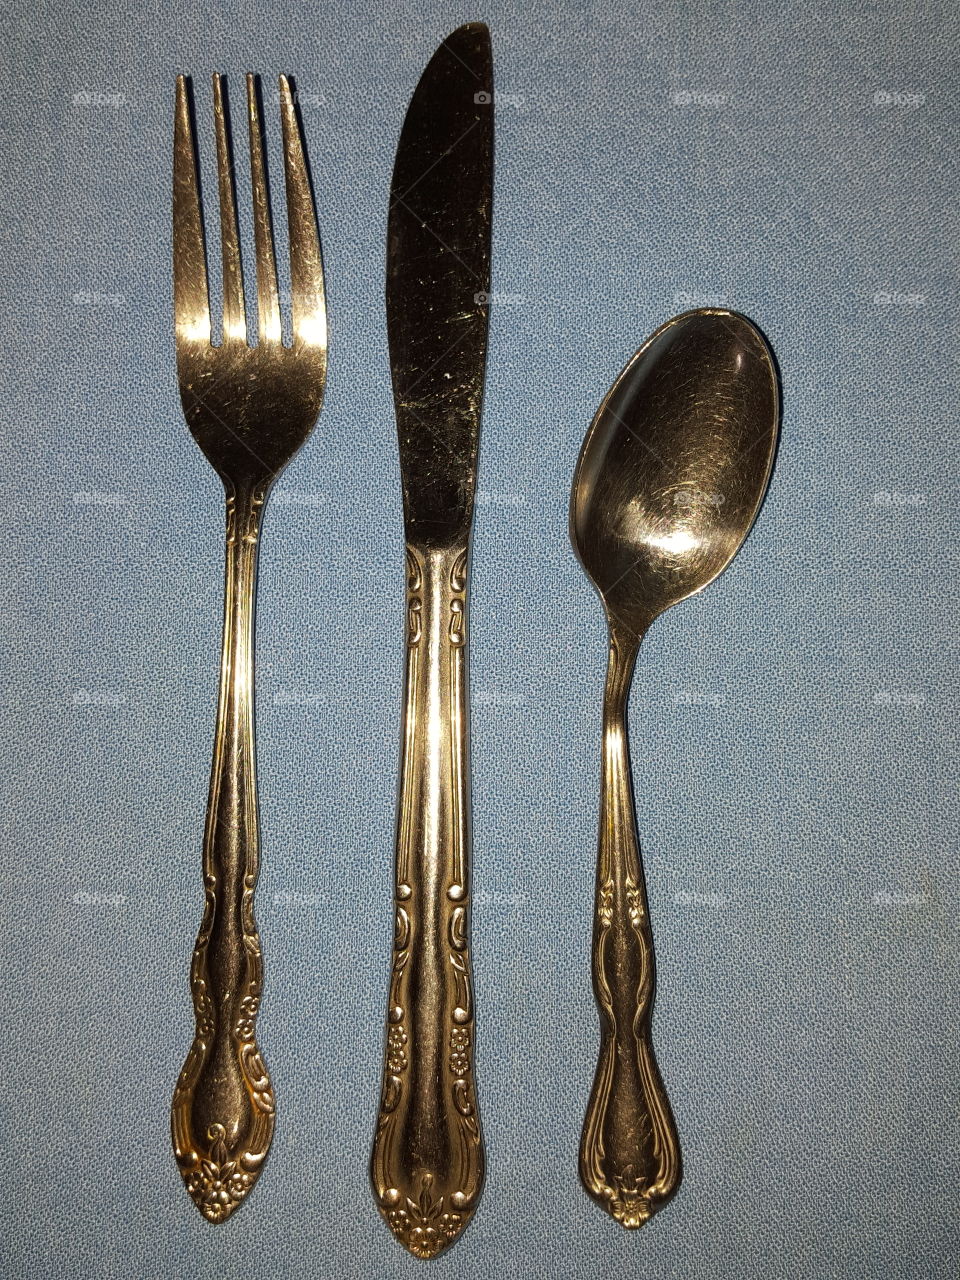 Fork, Knife and Imperfect Spoon